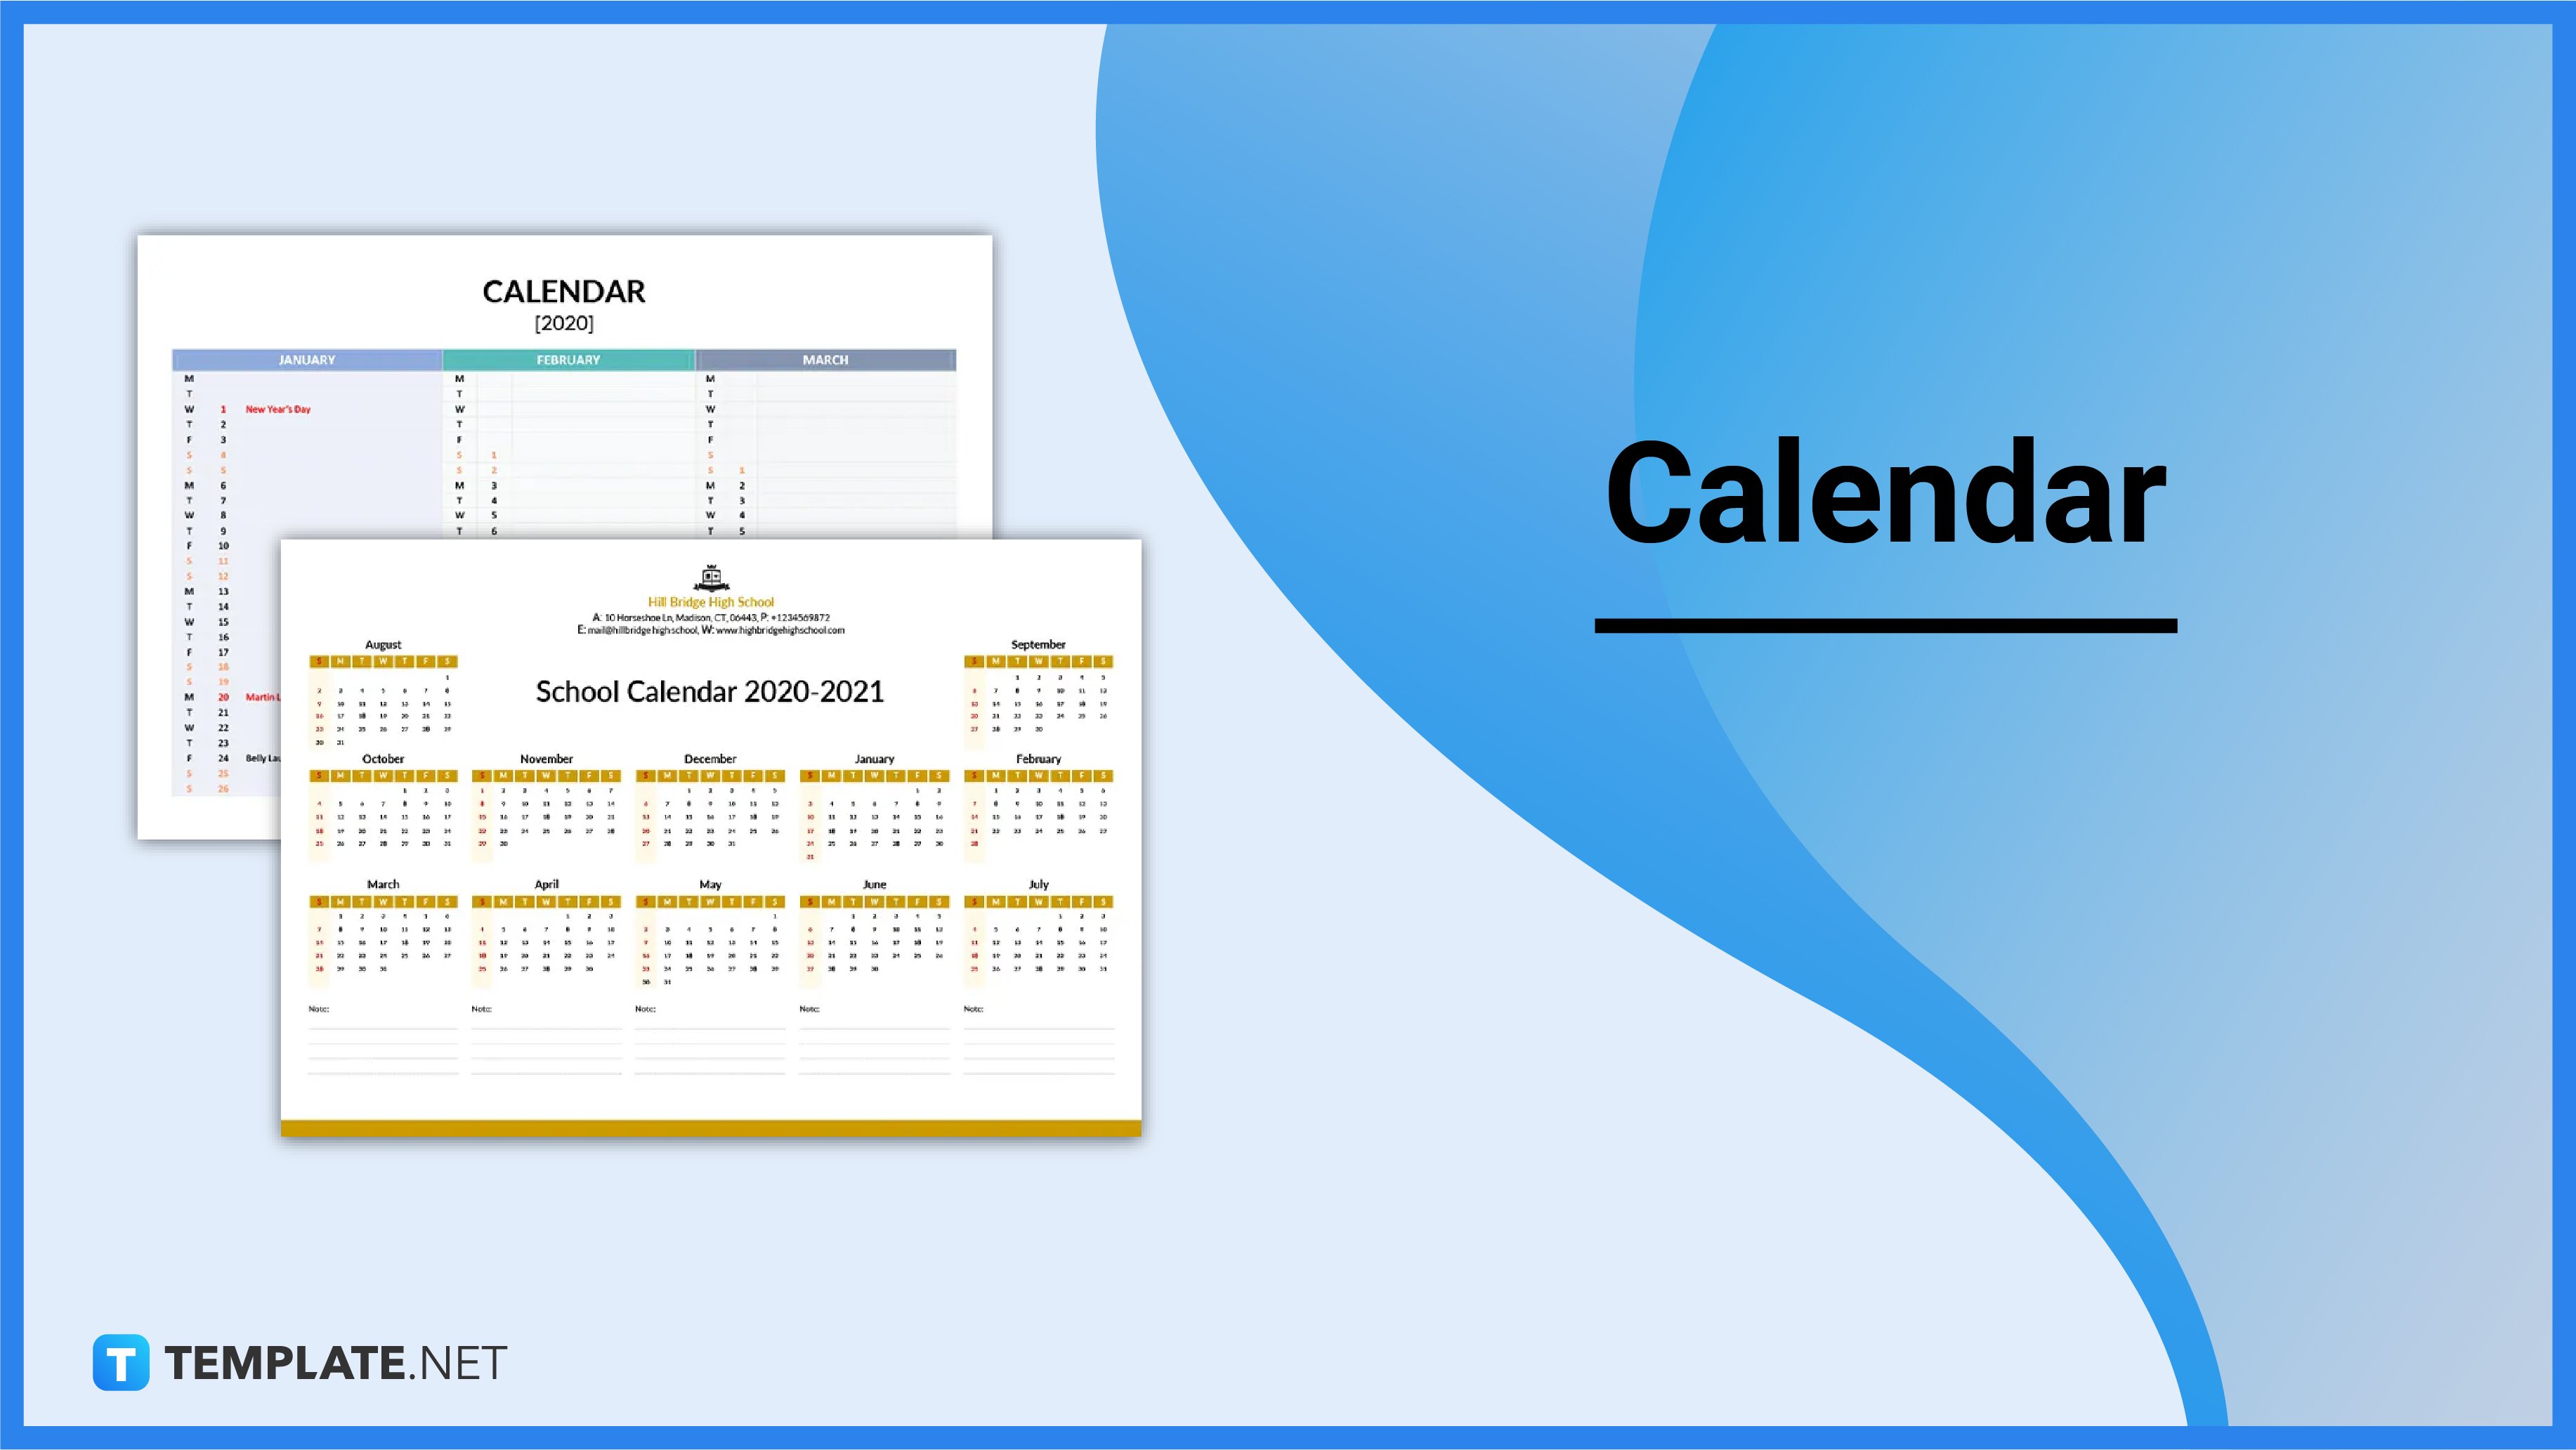 Calendar What Is a Calendar? Definition Types Uses